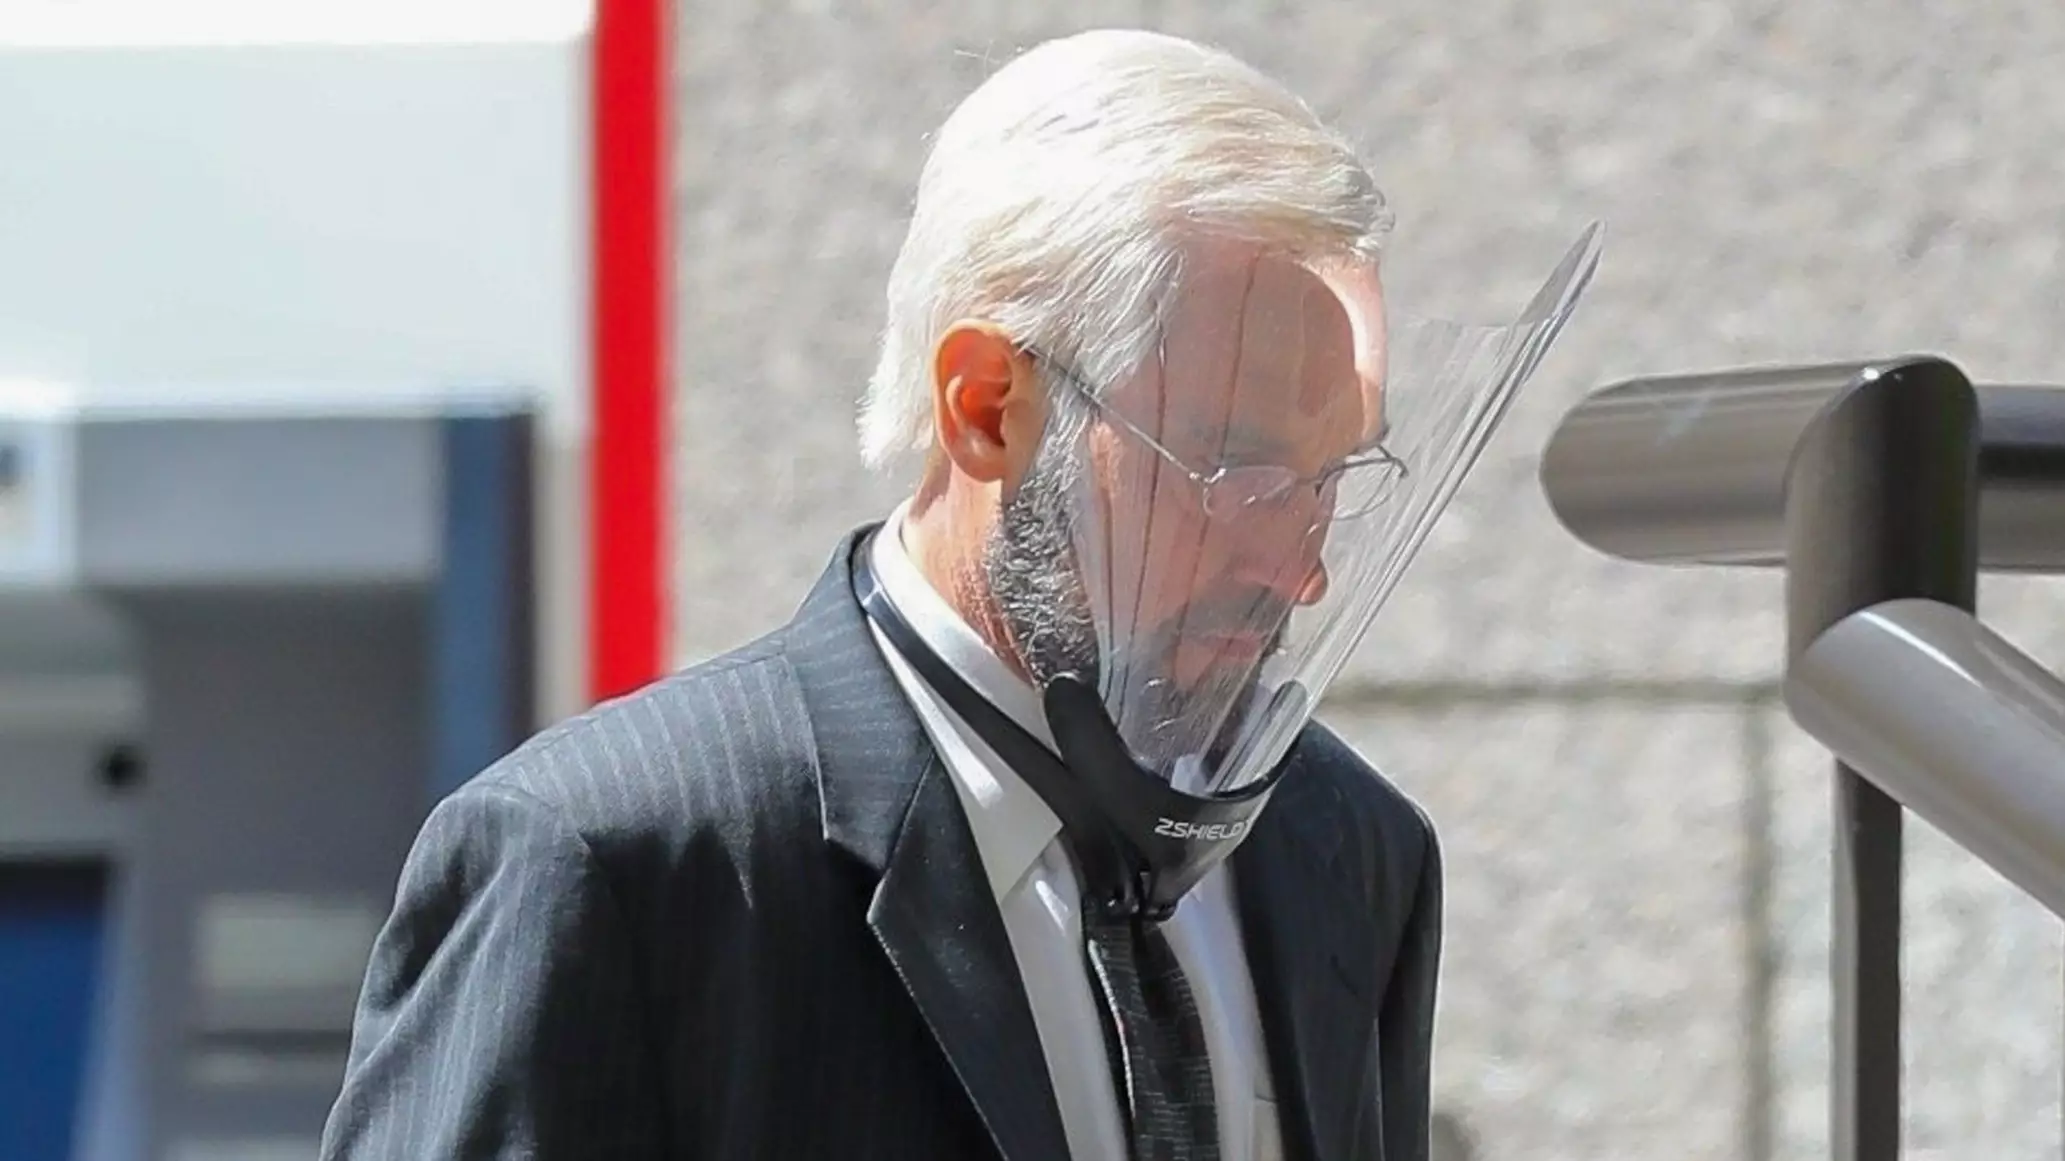 Paul Rudd Finally Looks Old As He's Seen With White Hair For New TV Role